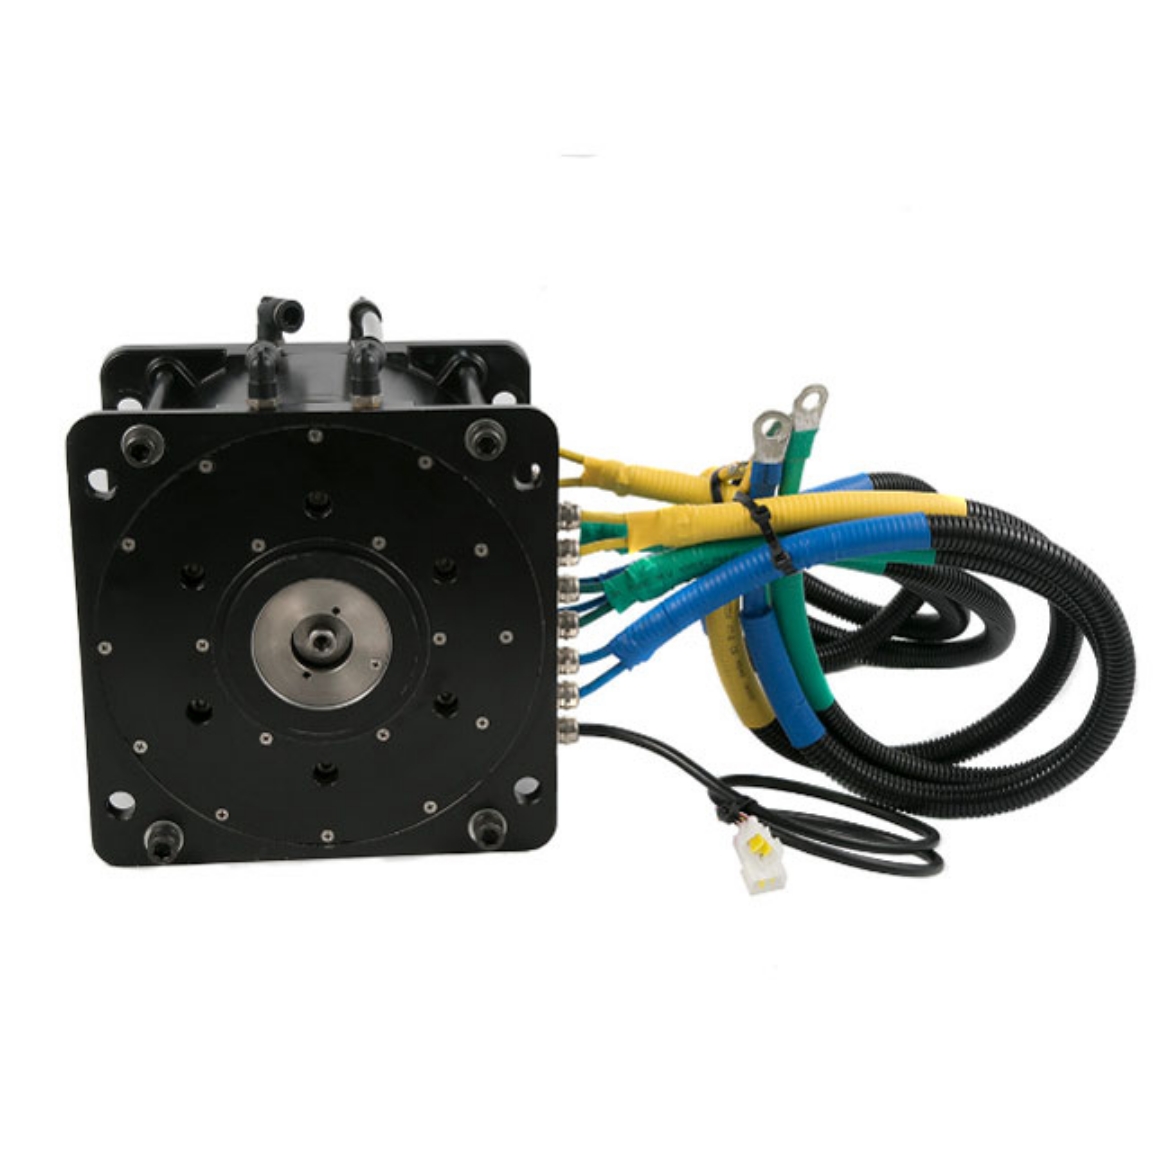 20kW BLDC Motor For Electric Vehicle, Water Cooling